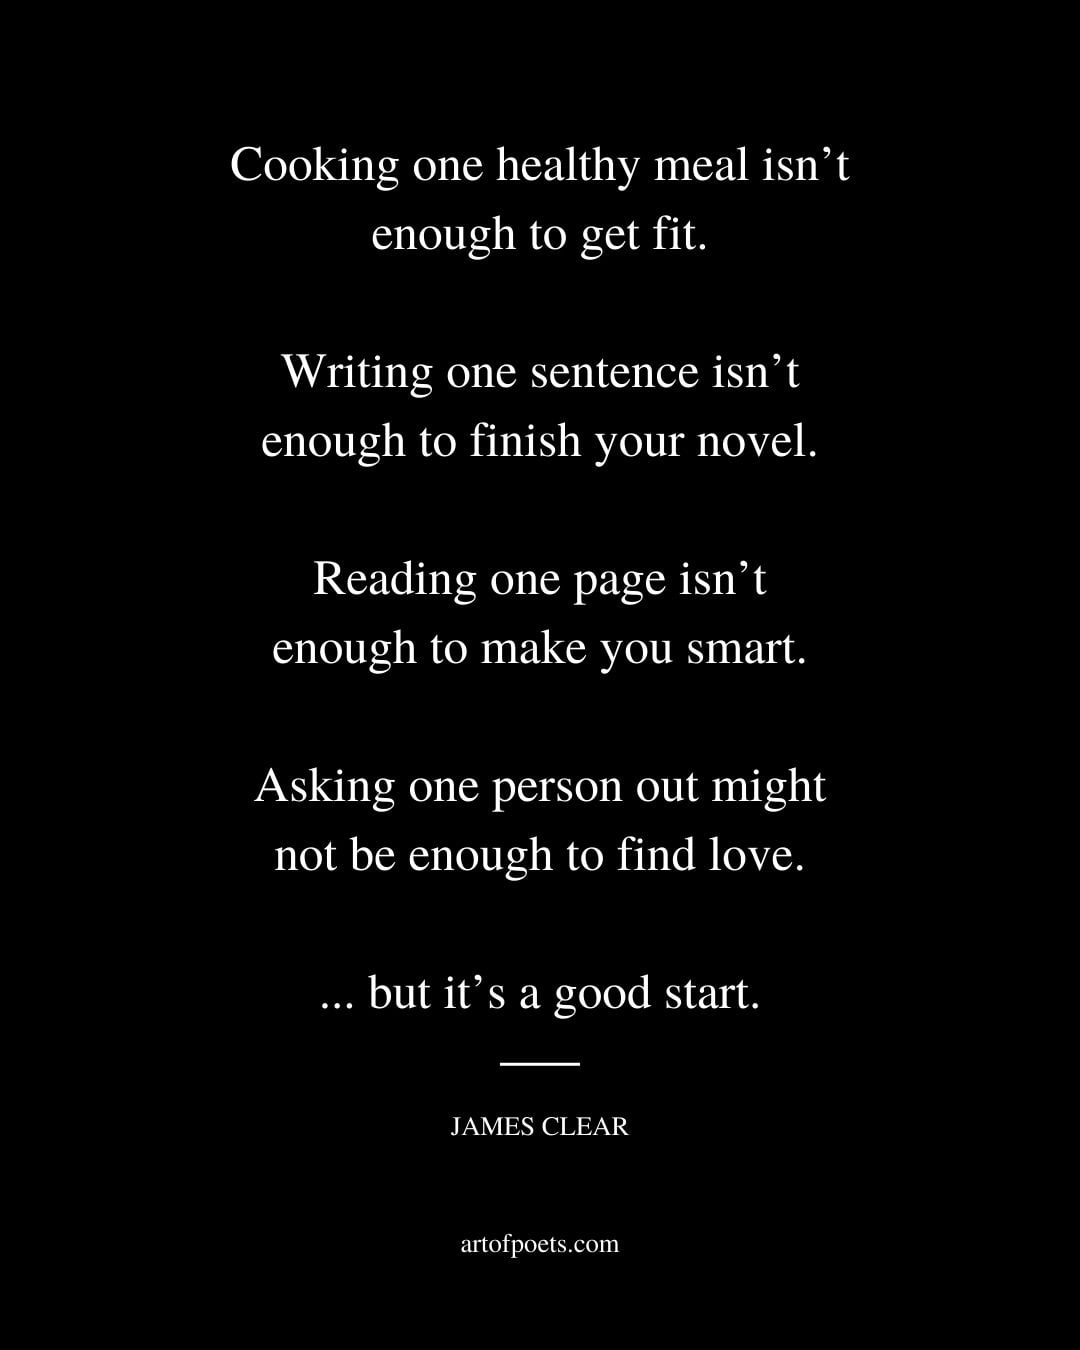 Cooking one healthy meal isnt enough to get fit. Writing one sentence isnt enough to finish your novel